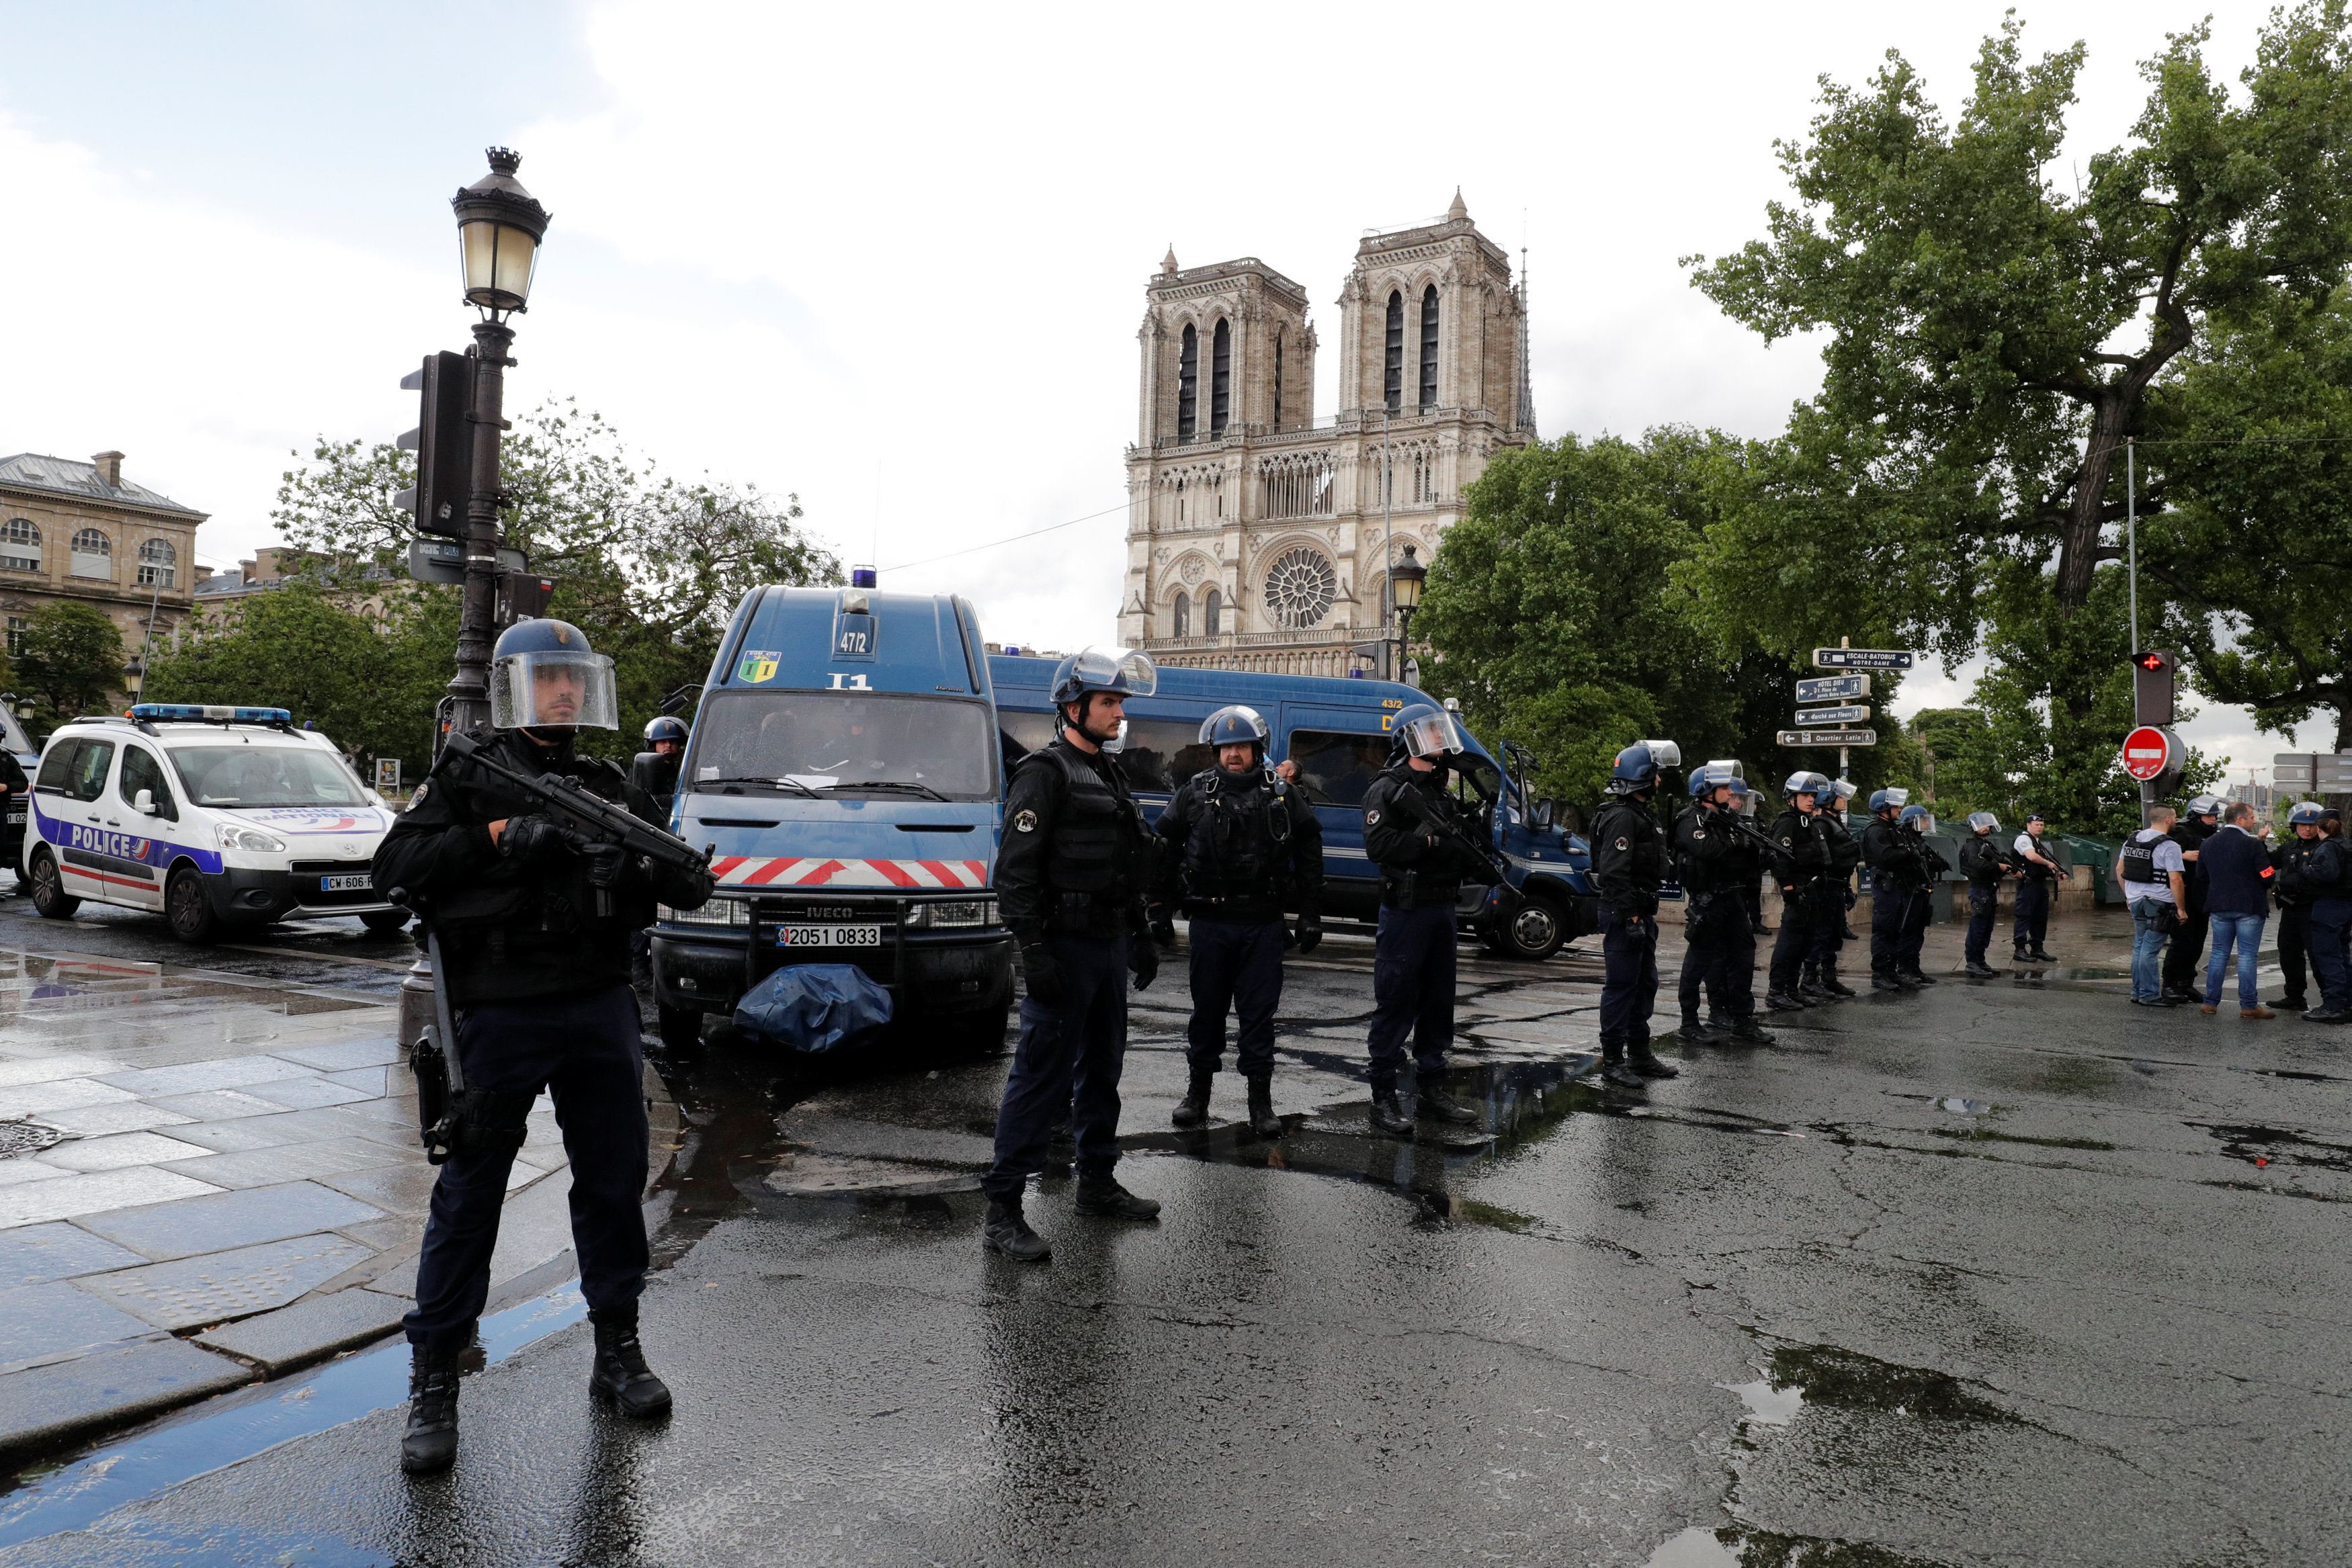 Girlfriend risk Helmet Man shot after attacking police outside Paris' Notre Dame - Times of Oman